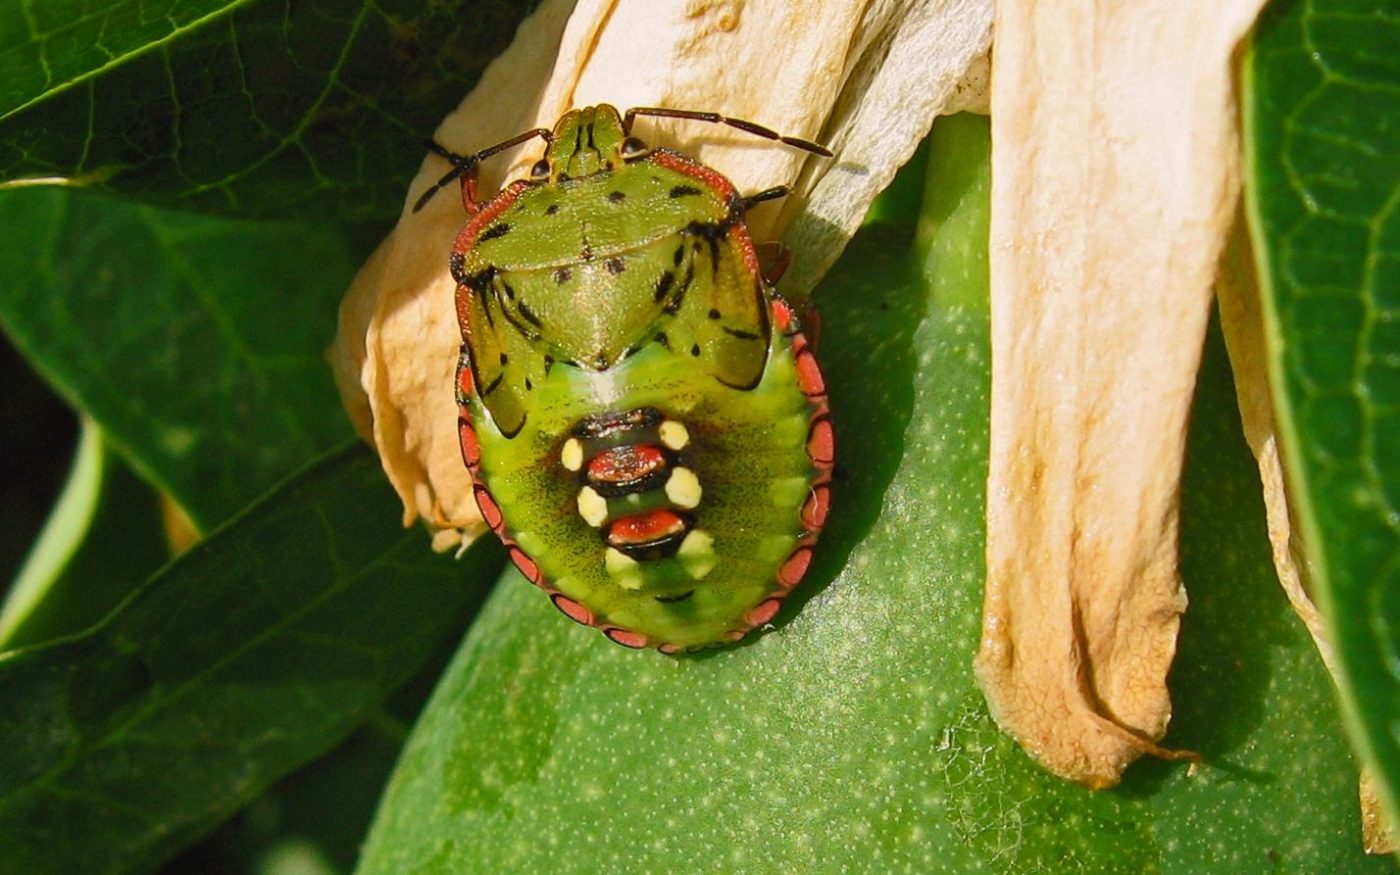 Juvenile vegetable bug on passion fruit in Croatia